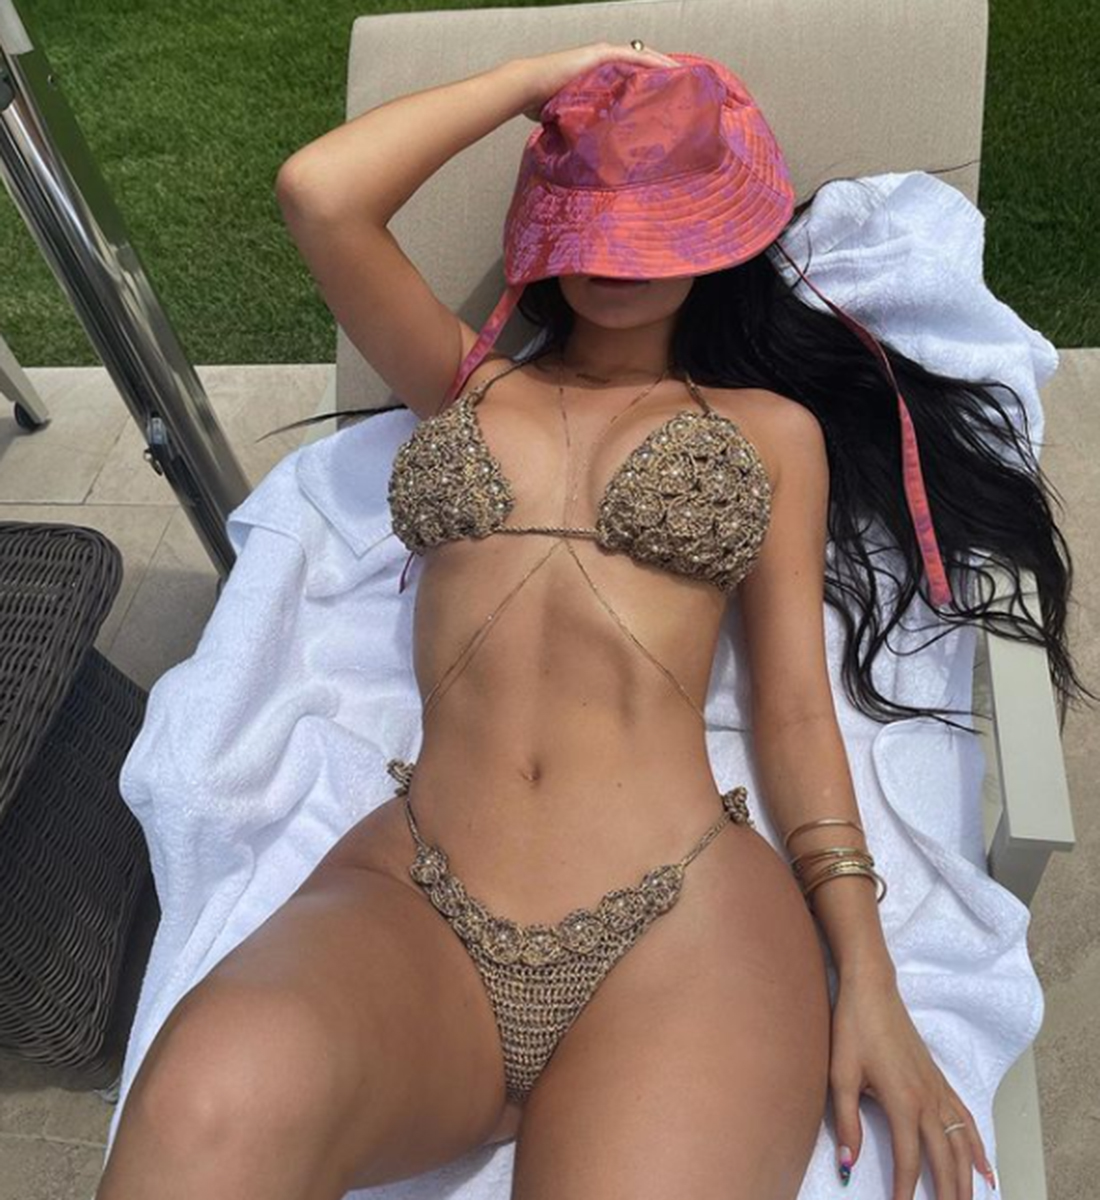 Kylie πη struck again with outrageously revealing photos! 4